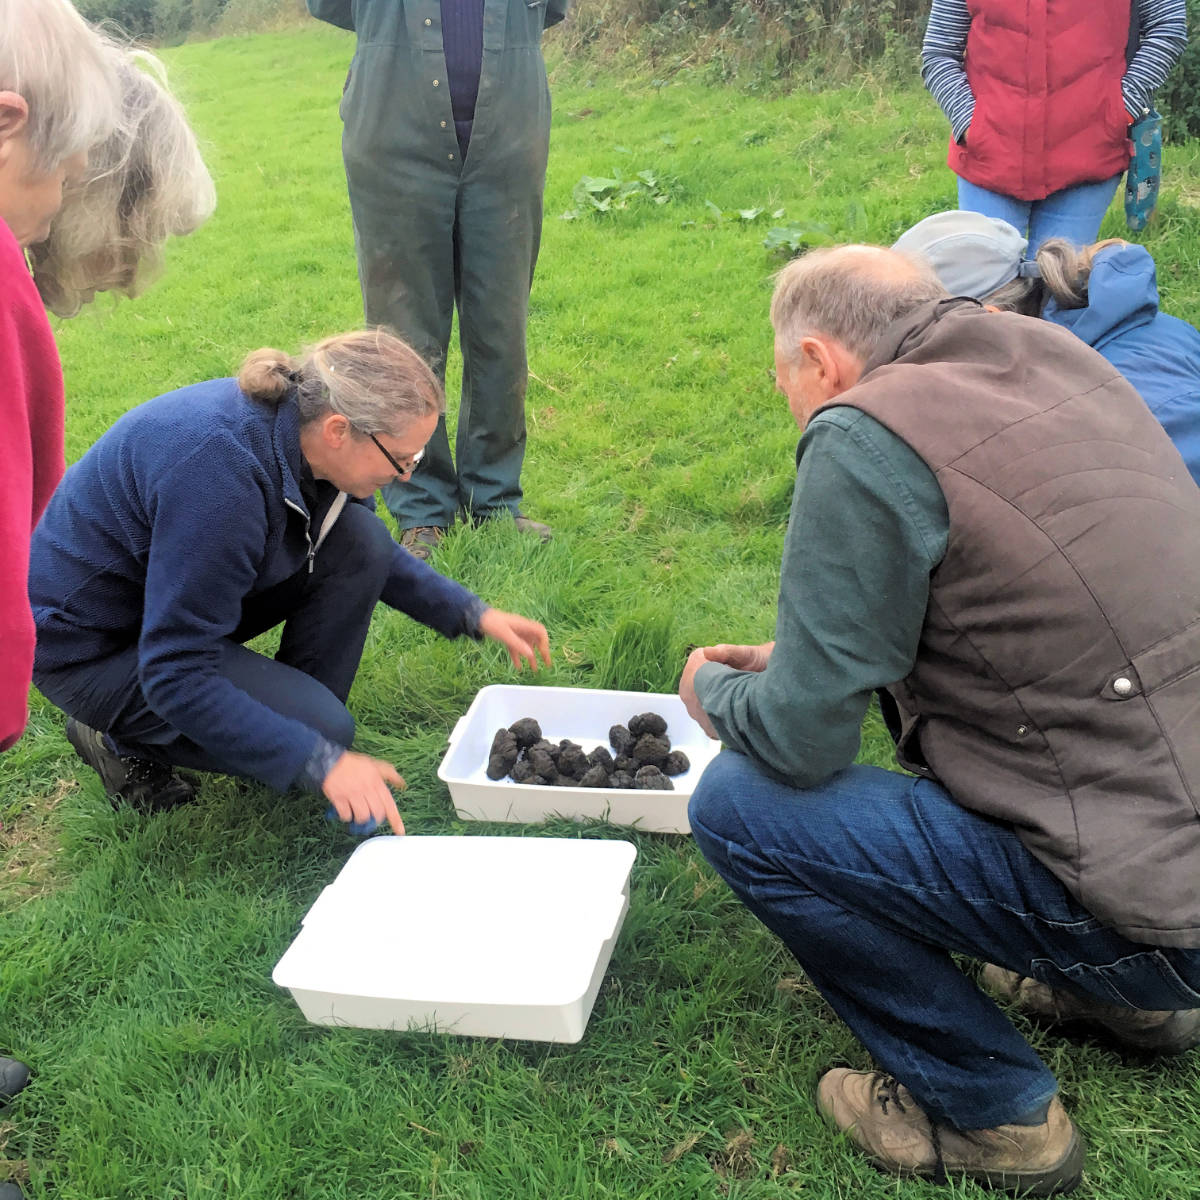 An animal health event for farmers/landowners looking at dung beetles